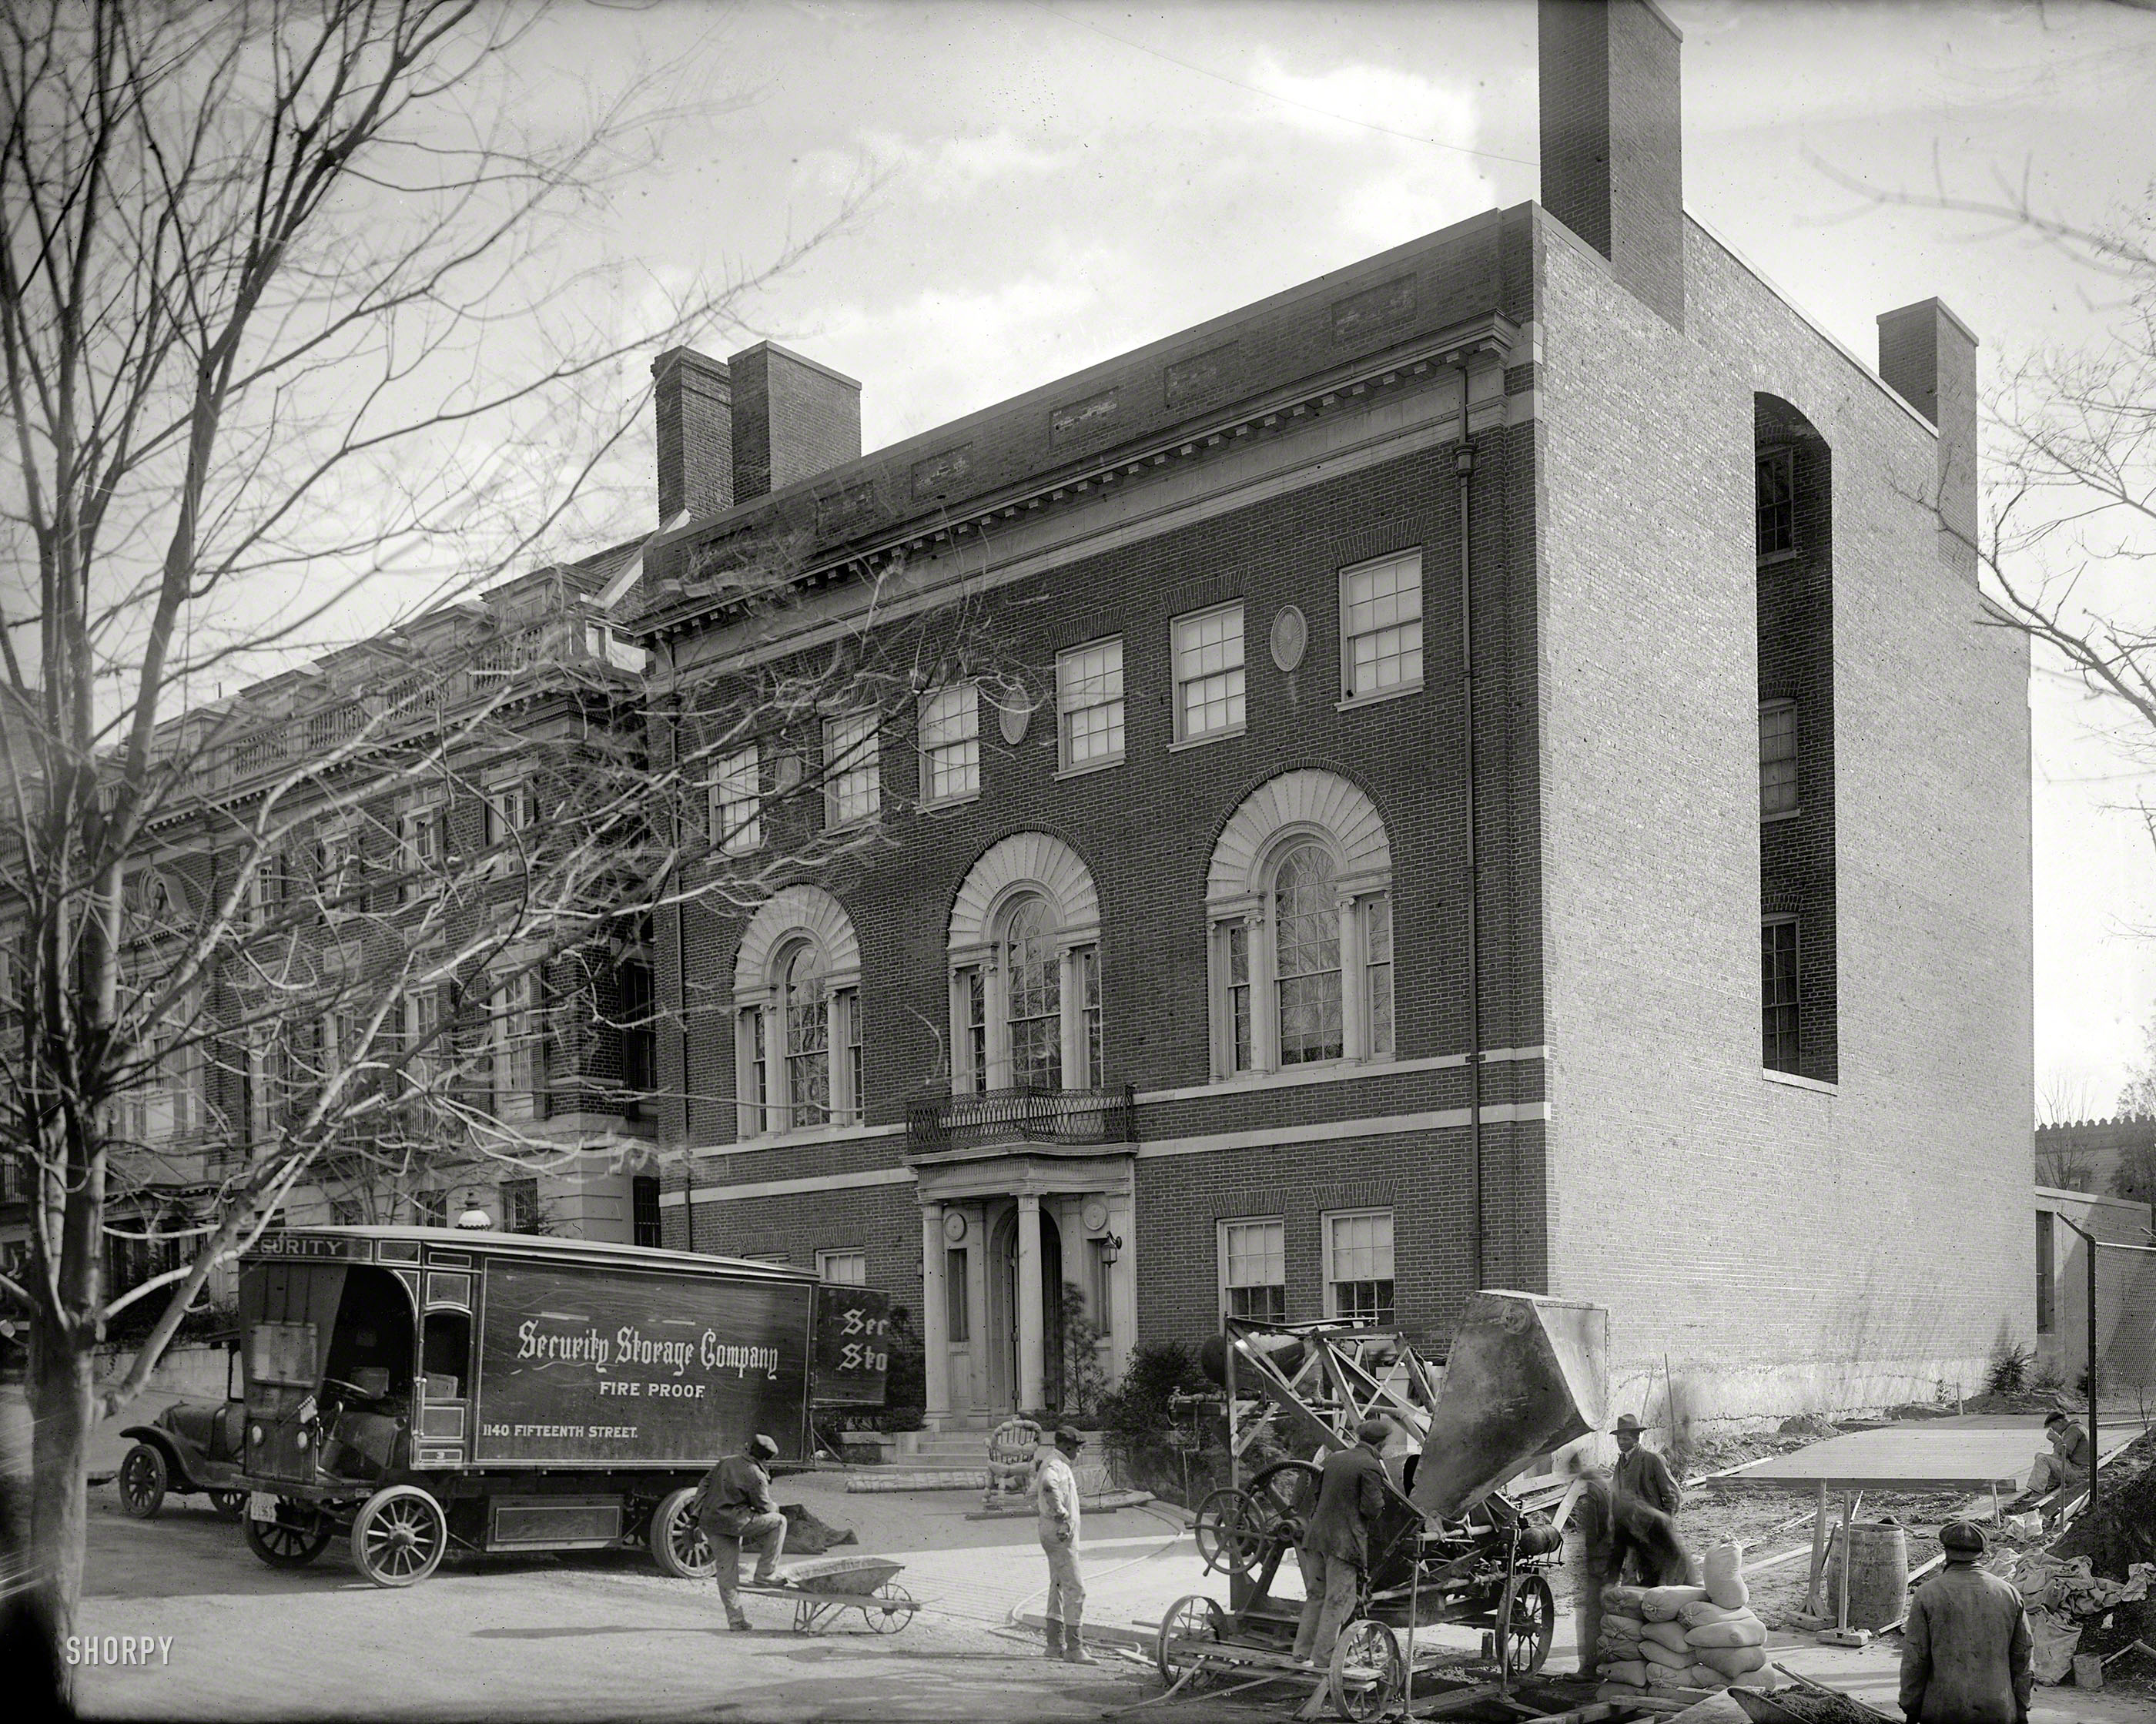 Washington, D.C. "Woodrow Wilson house, S Street." Residence of the former president and his wife starting in 1921, and where he died in 1924. National Photo Company Collection glass negative. View full size.